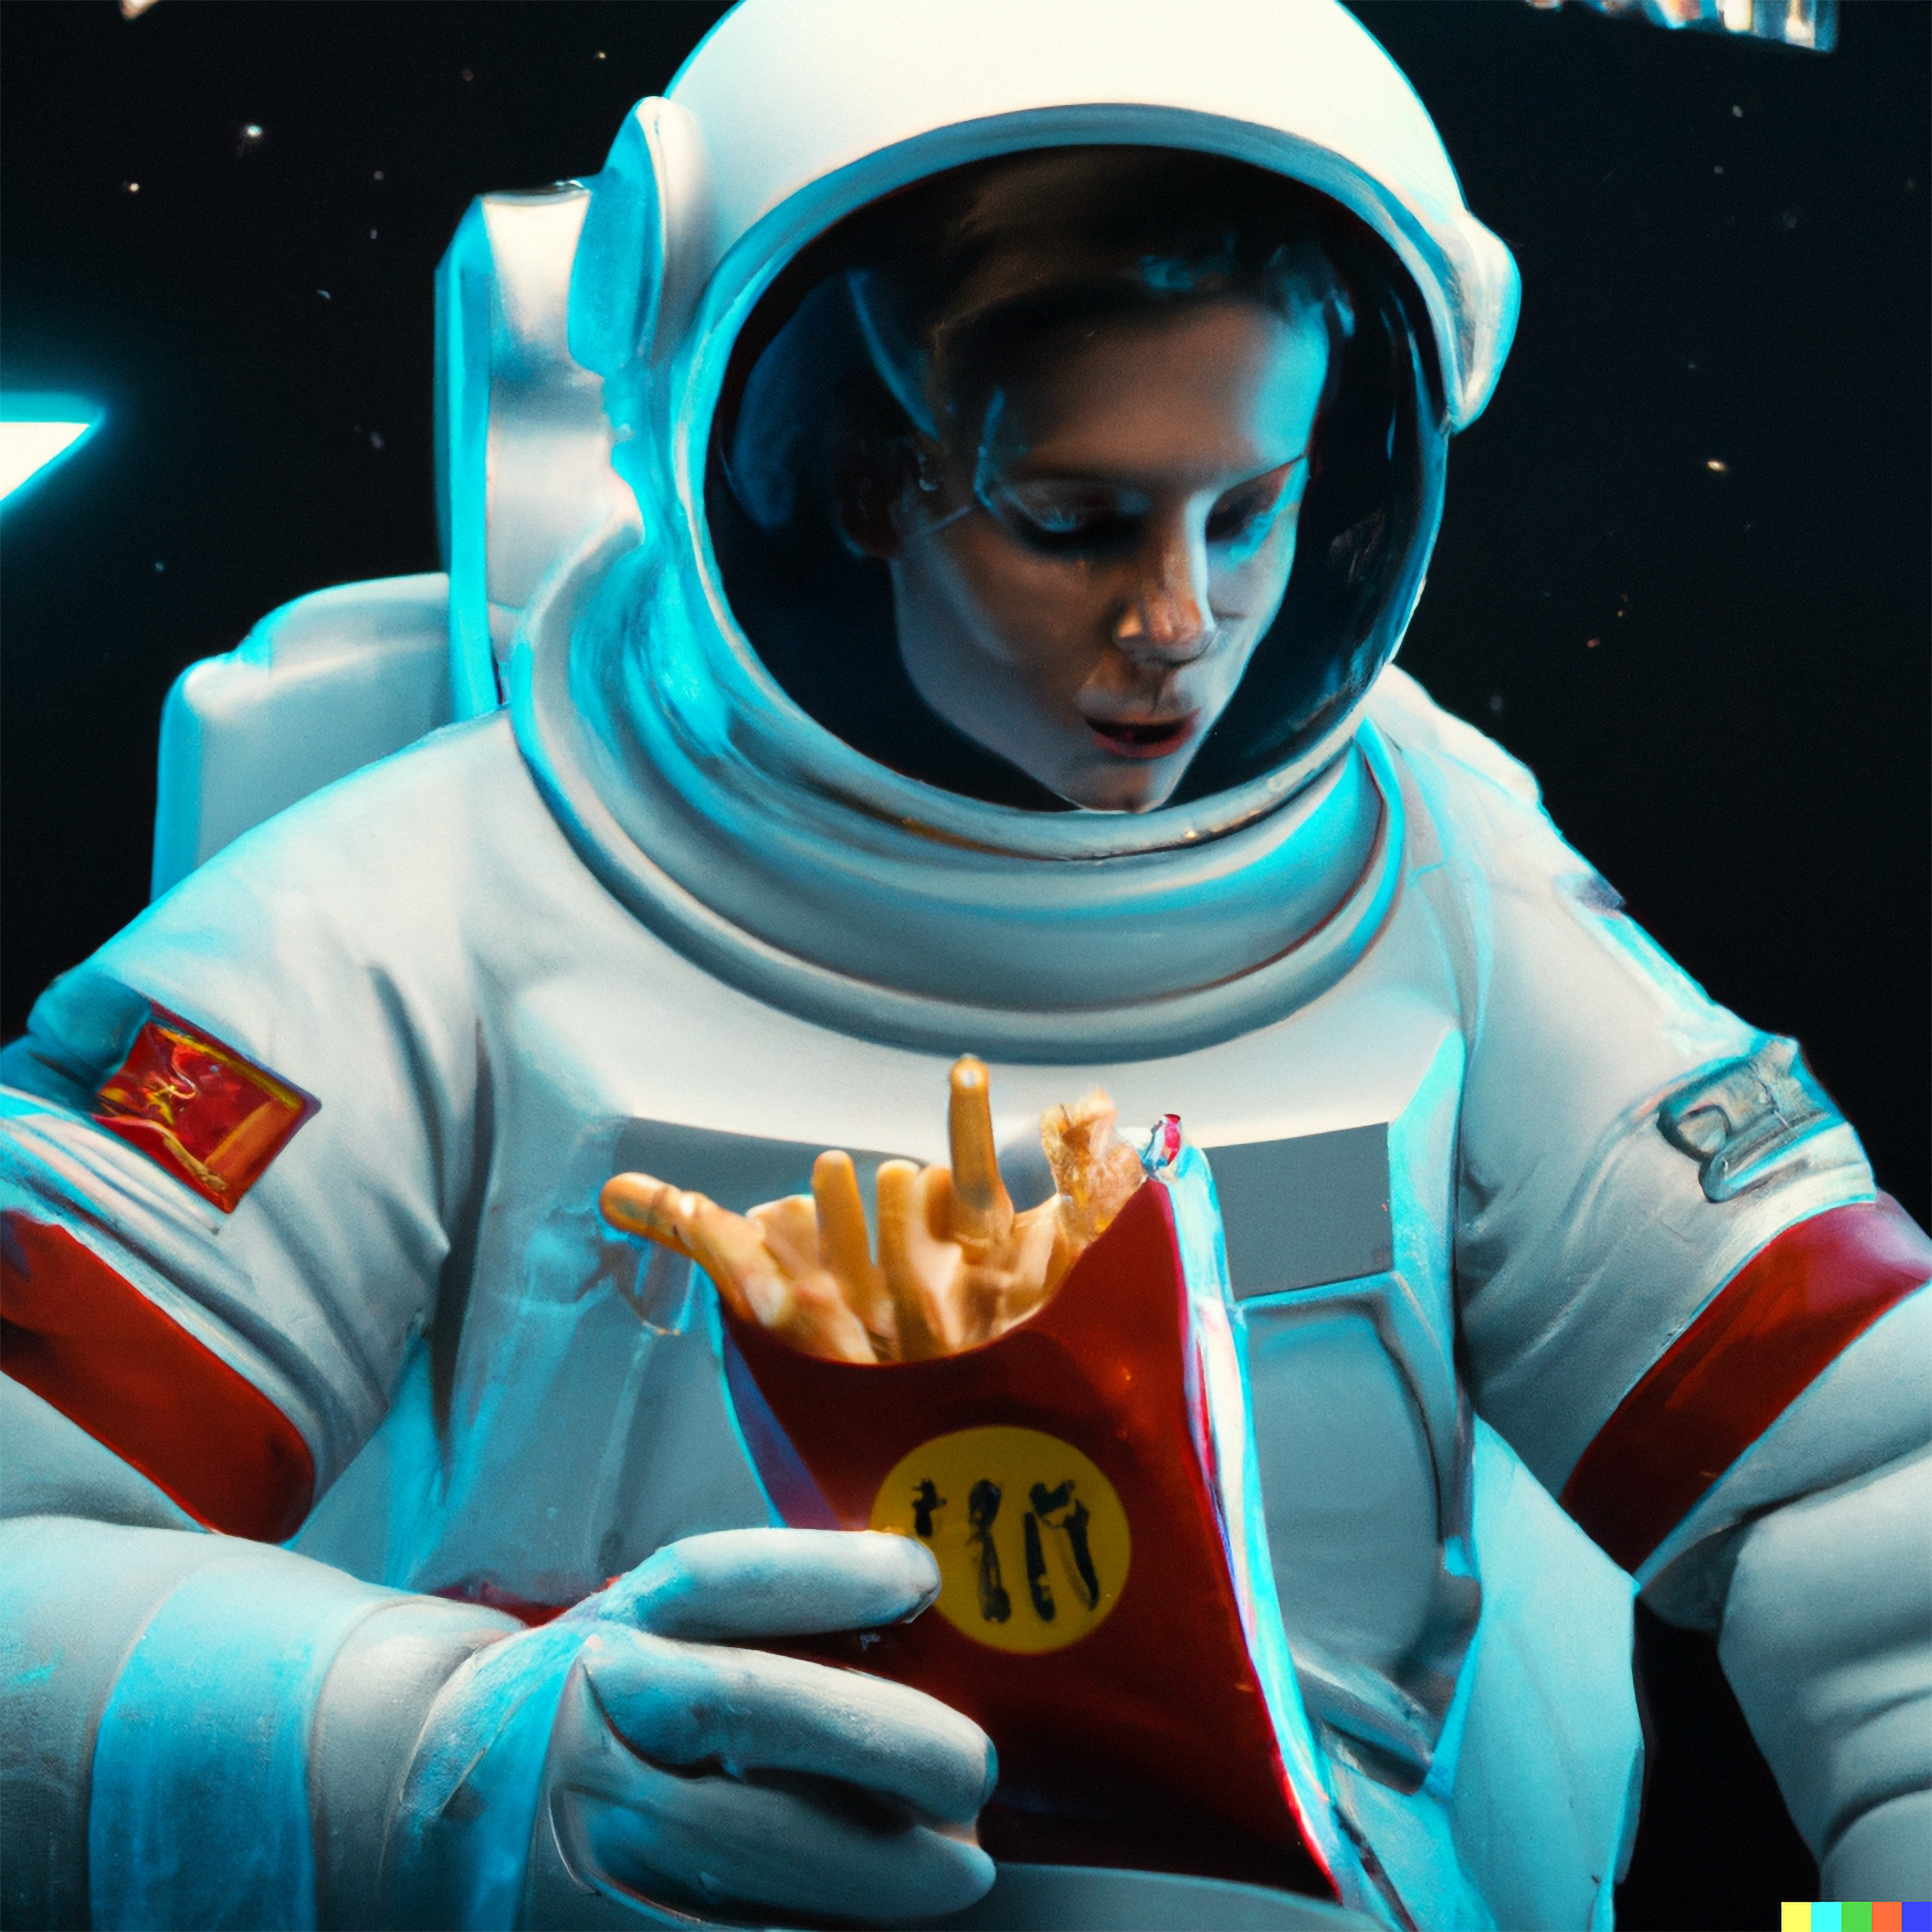 Visual of Yes, we can fry potatoes in space!